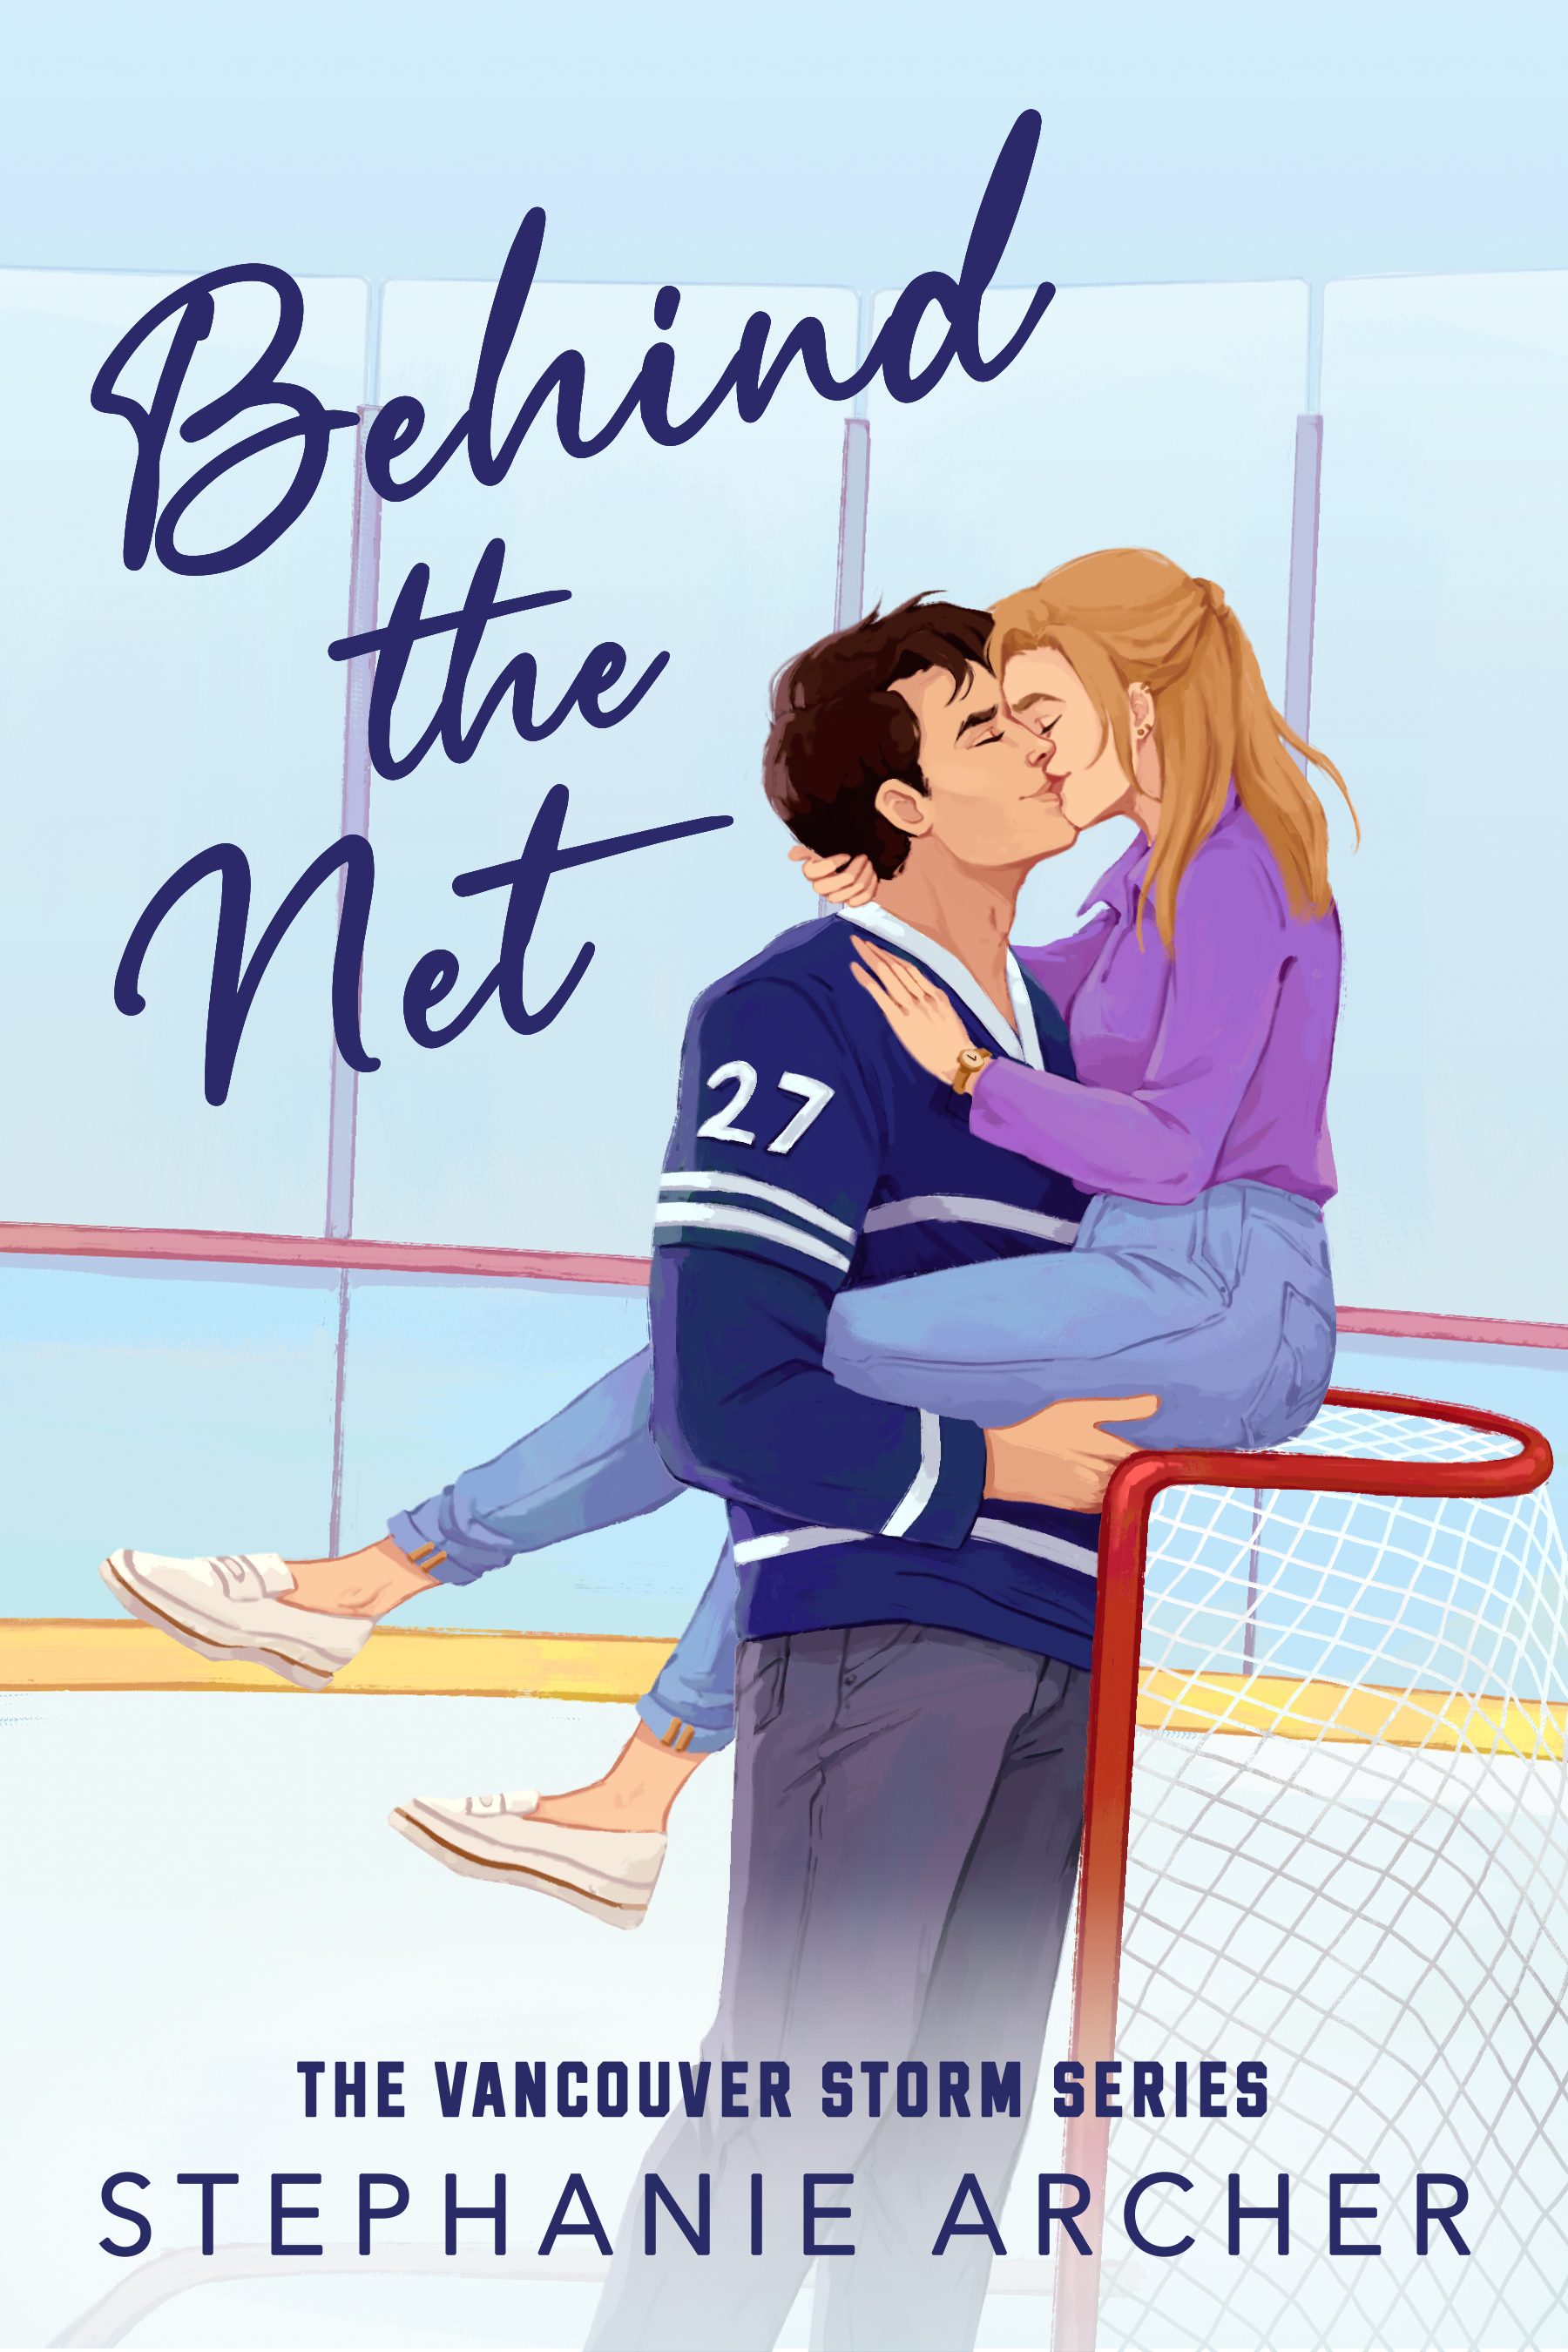 Behind The Net Stephanie Archer PDF (The Vancouver Storm series)